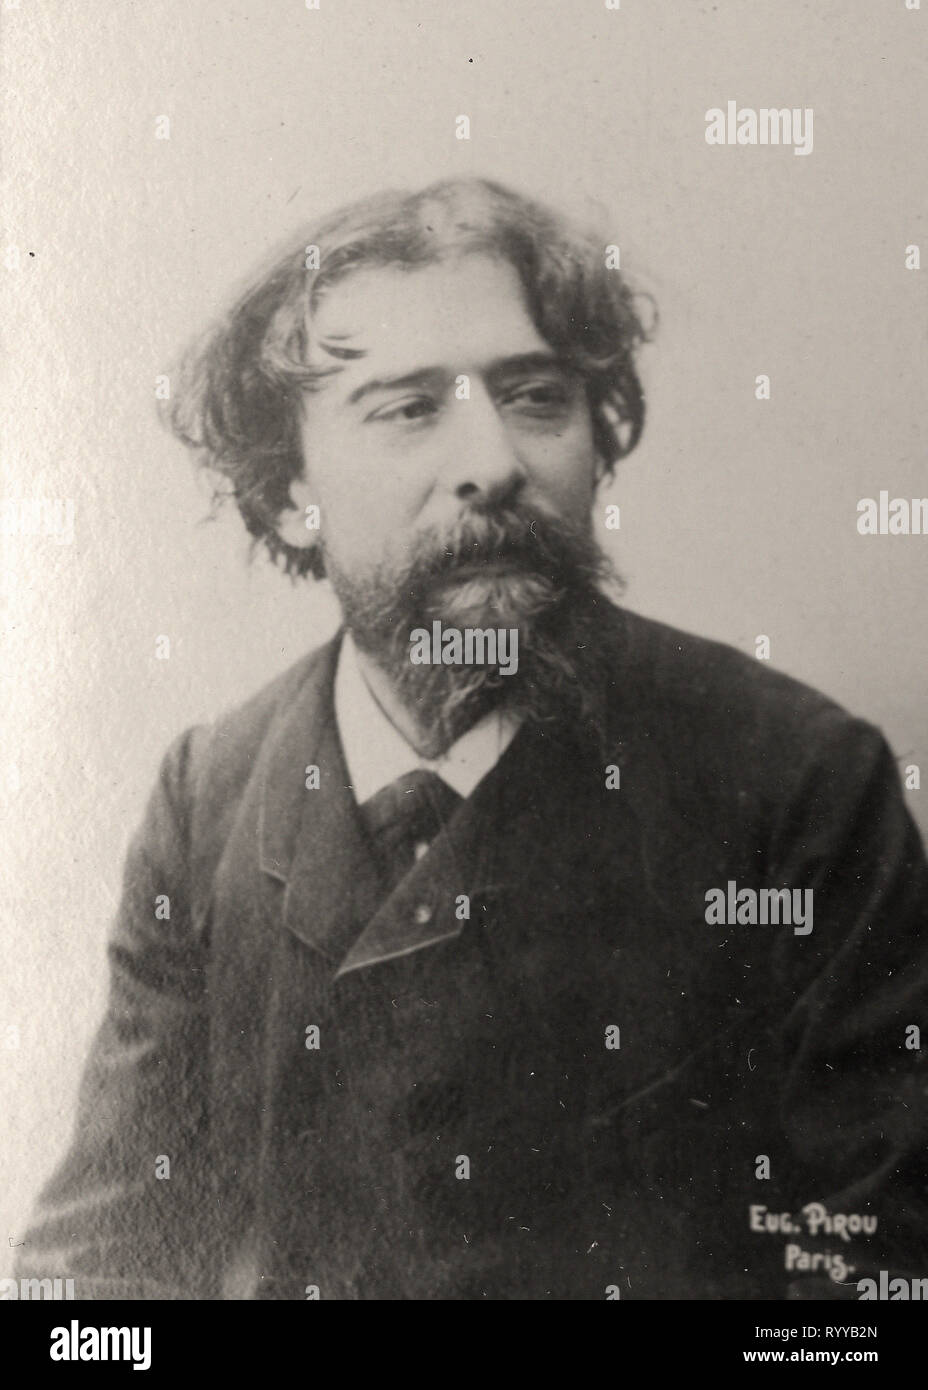 Photographic Portrait Of Daudet   From Collection Félix Potin, Early 20th Century Stock Photo